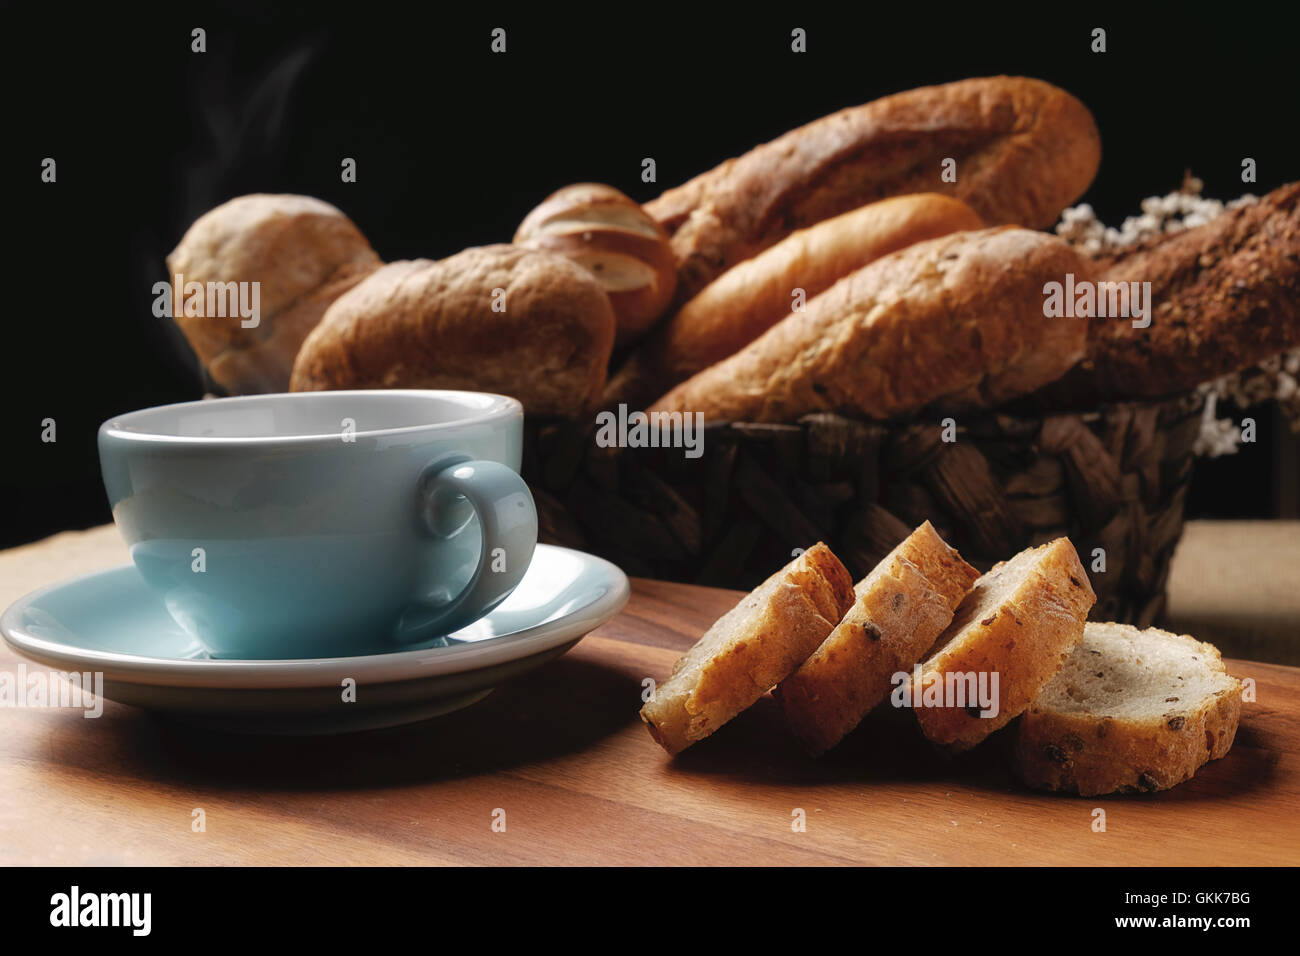 bread; grains; whole; wheat; freshness; baking; barley; food; oat; background; harvest; loaf; rye; toaster; black; wood; cooking Stock Photo